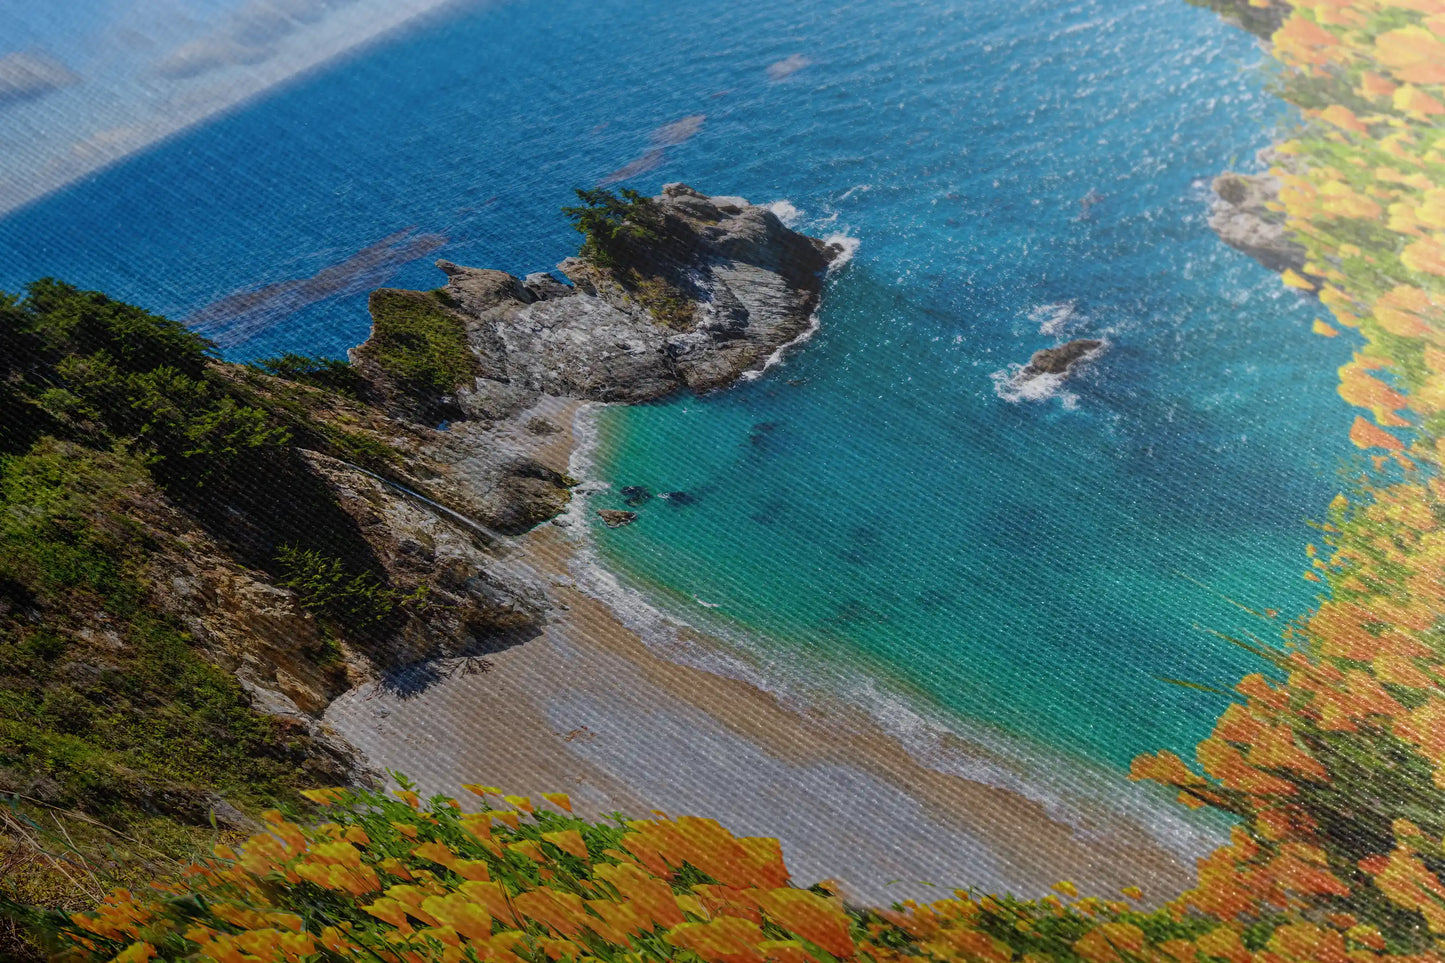 Detailed close-up of canvas wall art texture with the image of McWay Falls at Big Sur, accentuating the orange wildflowers and turquoise sea.